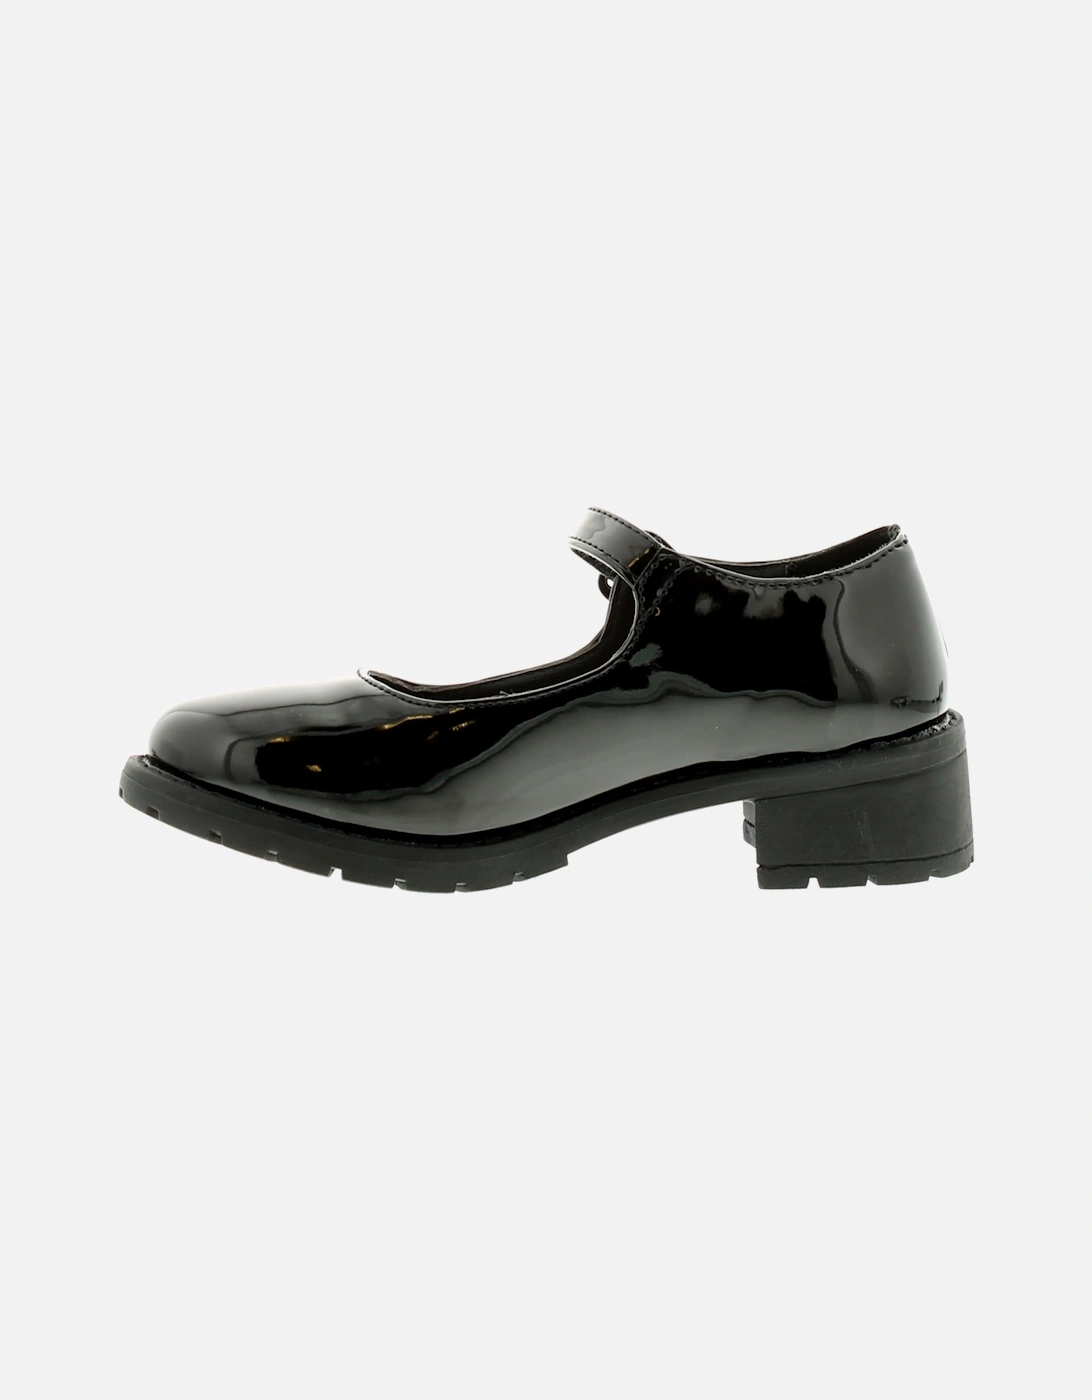 Girls Shoes School Dolly Buckle black patent UK Size